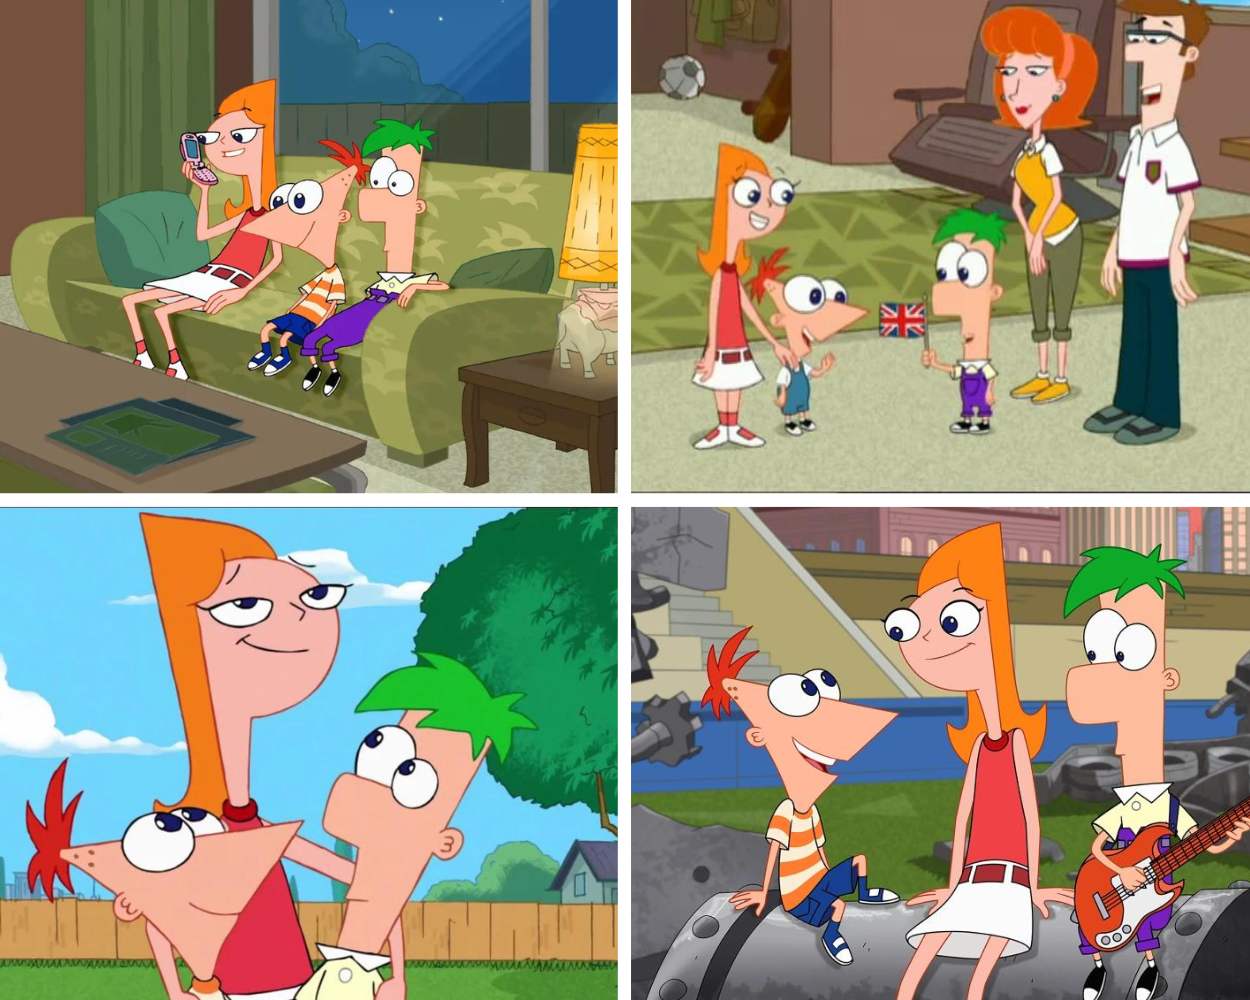 Candace, Phineas, and Ferb